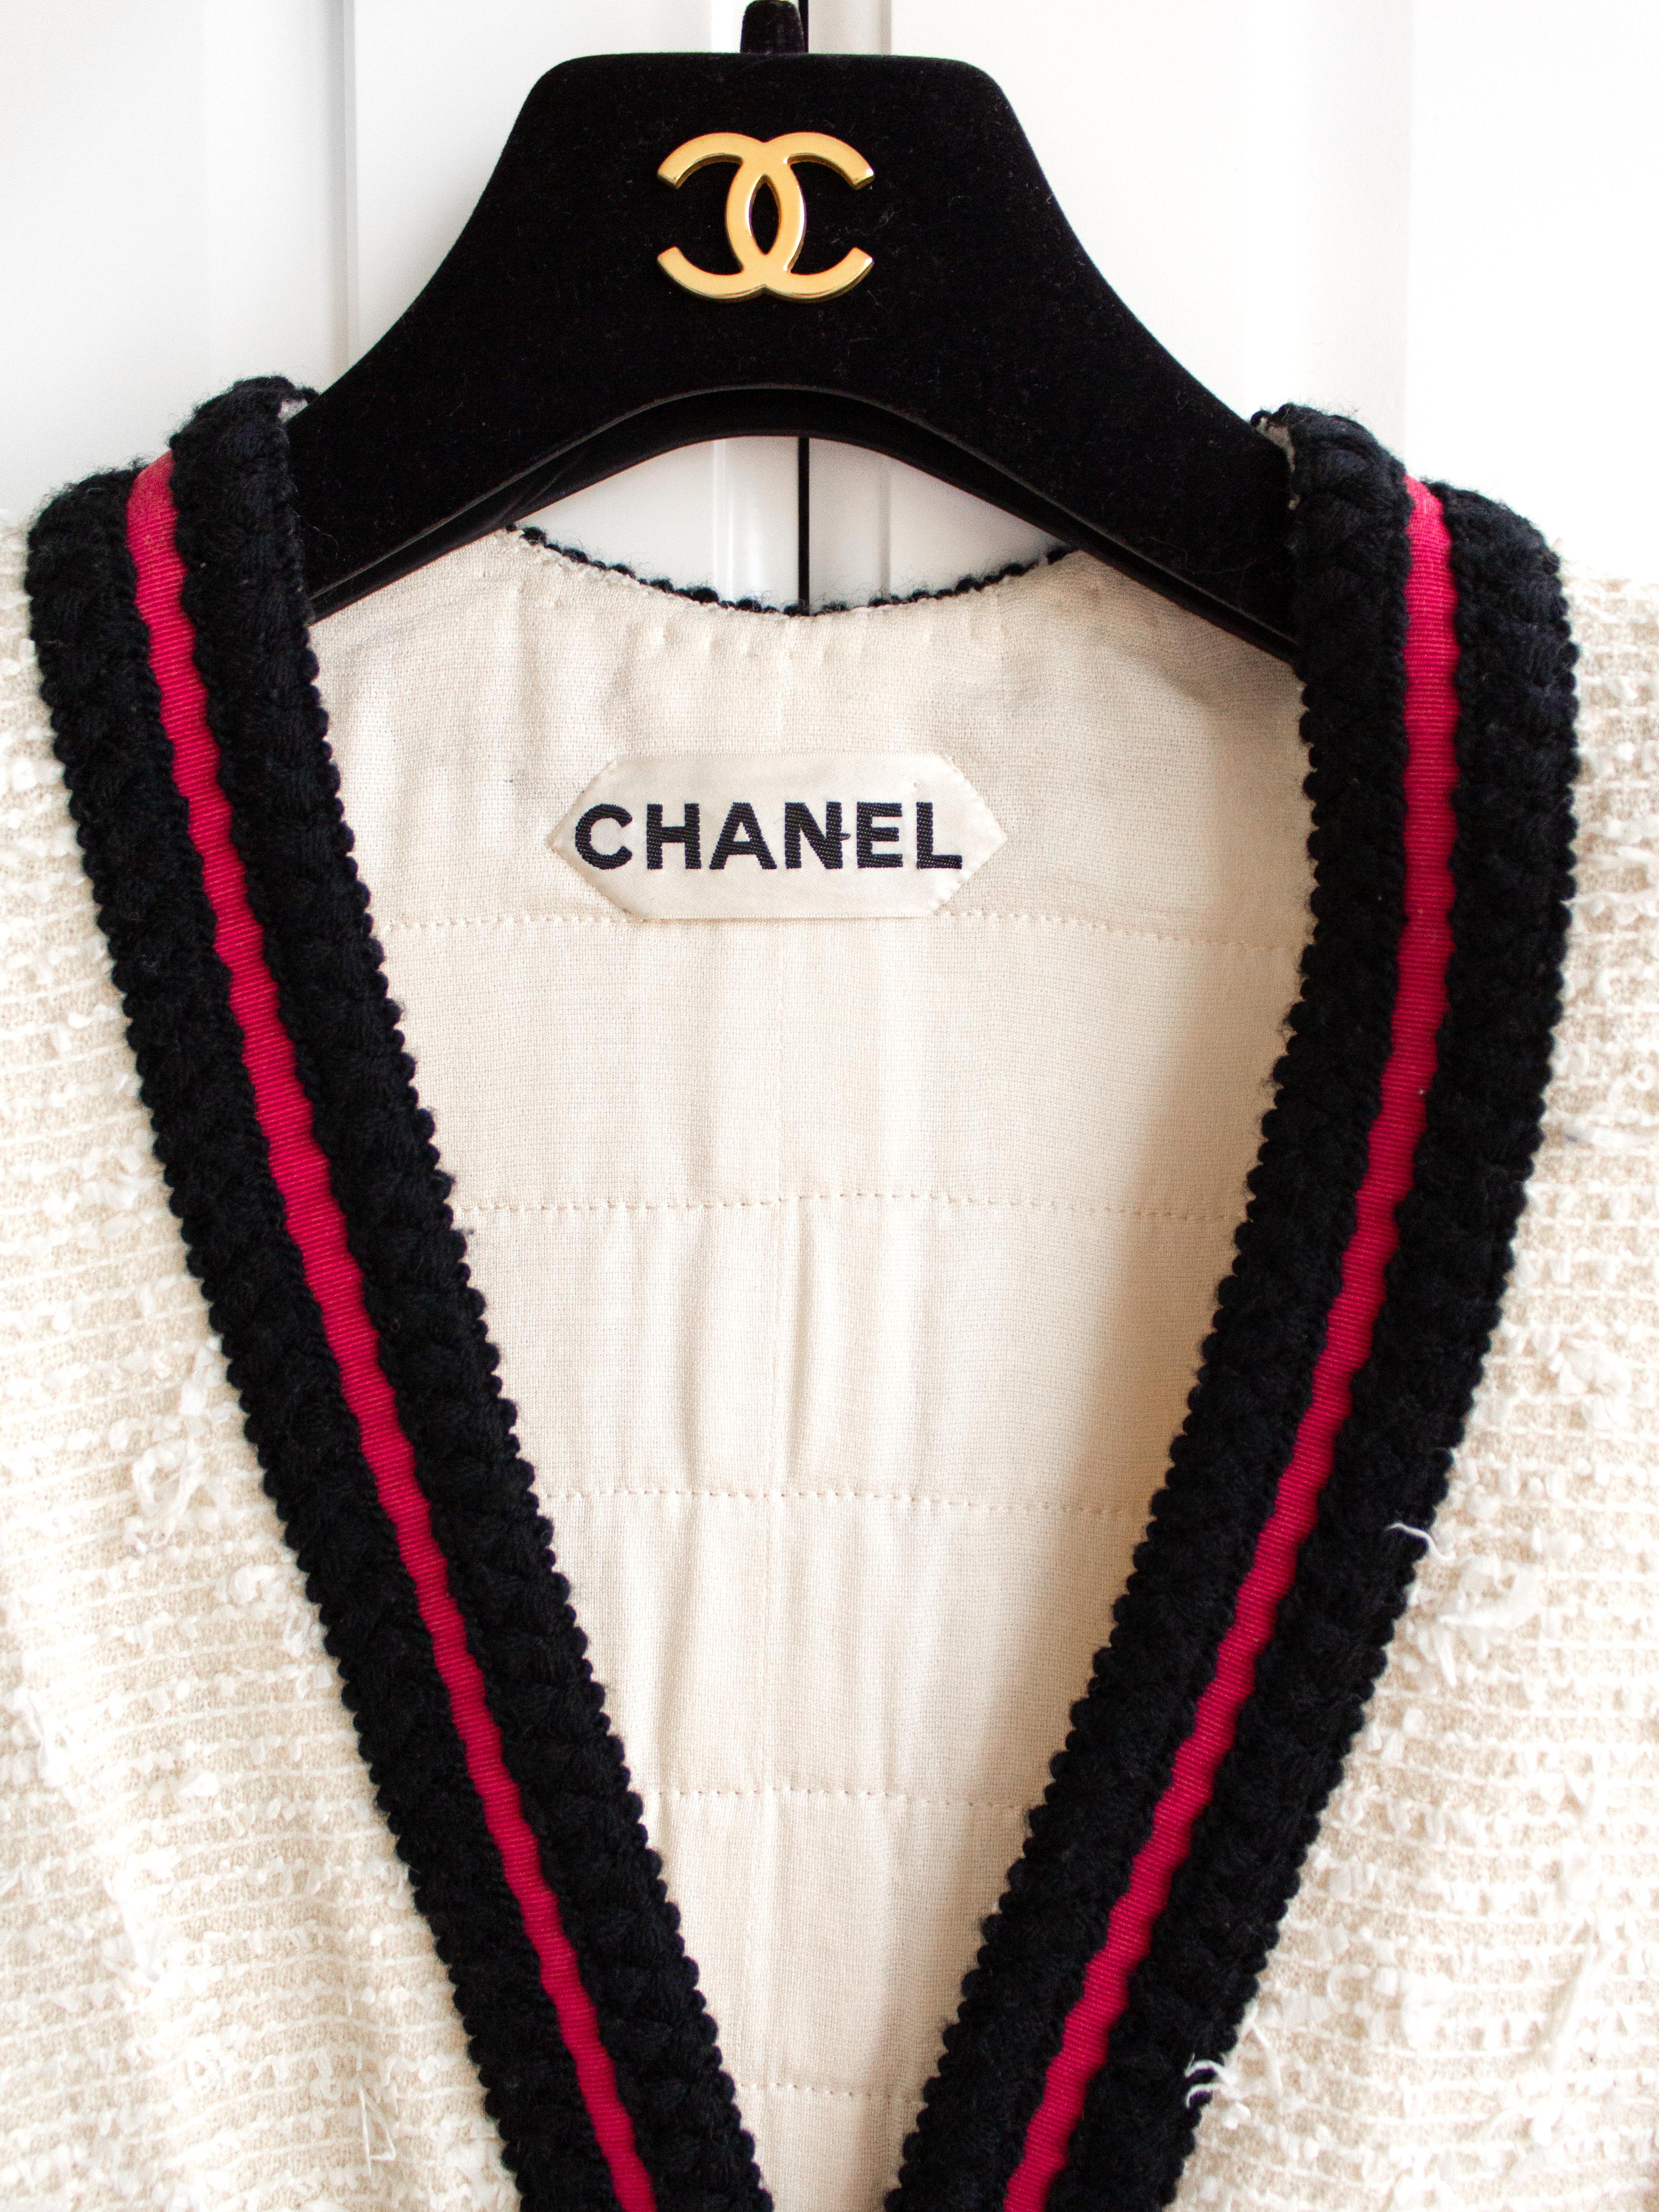 Chanel Vintage Haute Couture SS1997 White Ecru Black Raspberry Tweed Jacket Suit In Good Condition For Sale In Jersey City, NJ